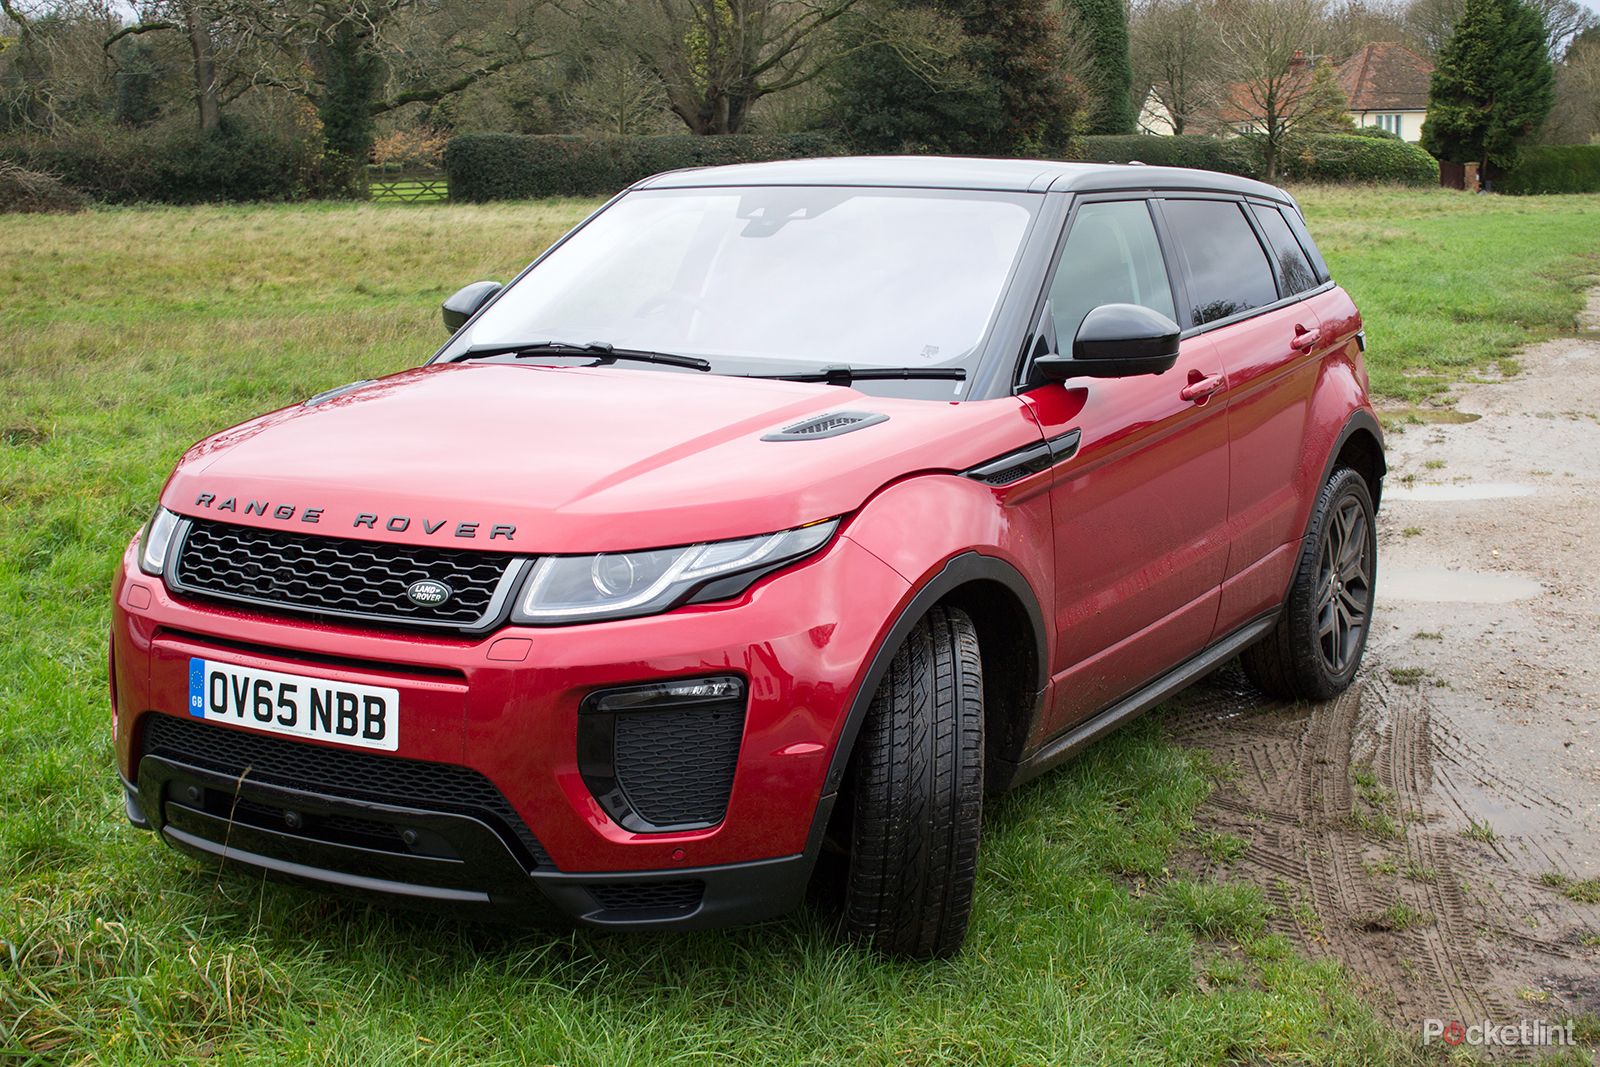 Range Rover Evoque 2016 review: Pushing design and performance further